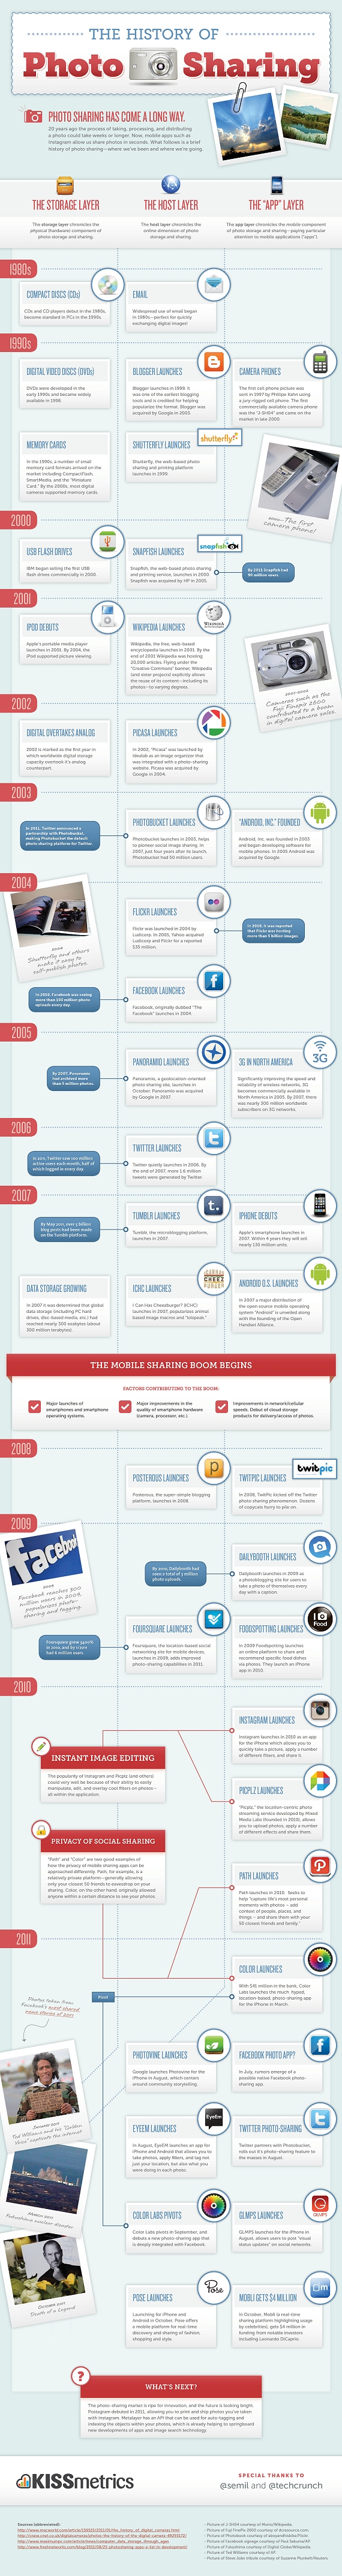 The History of Photo Sharing